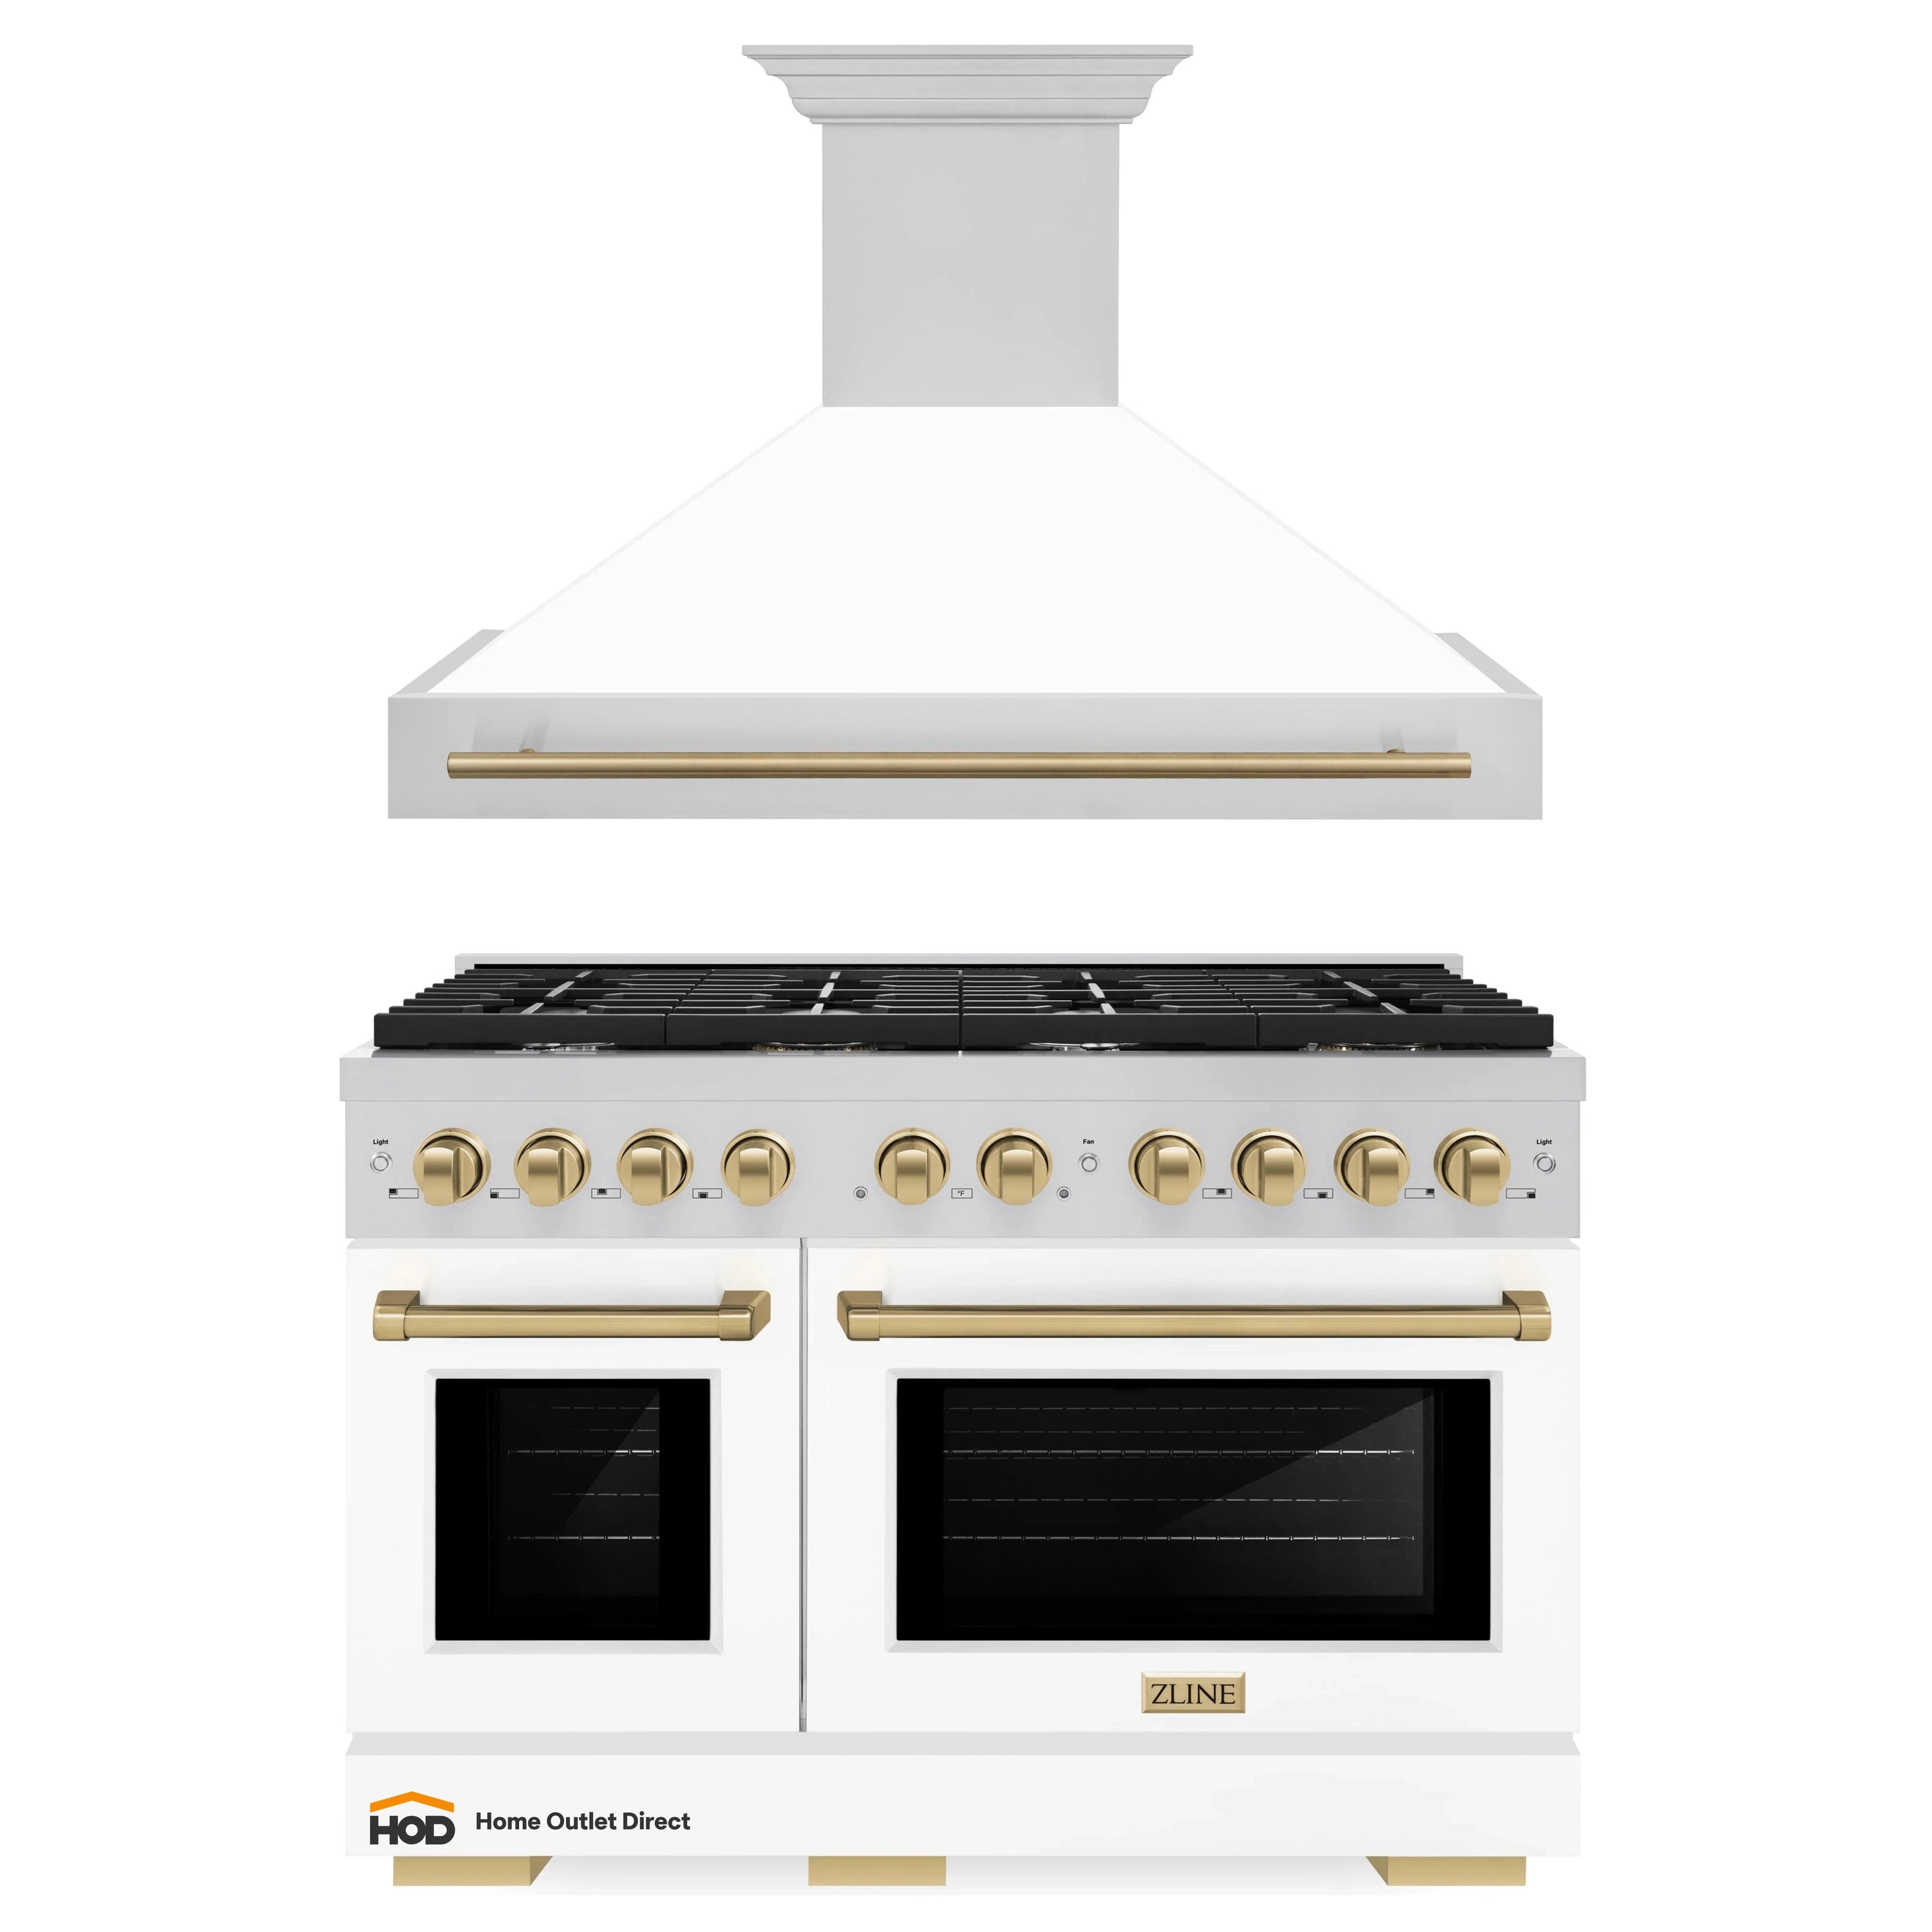 ZLINE Autograph Edition 2-Piece Appliance Package - 48-Inch Gas Range & Wall Mounted Range Hood in Stainless Steel and White Door with Champagne Bronze Trim (2AKPR-RGWMRH48-CB)